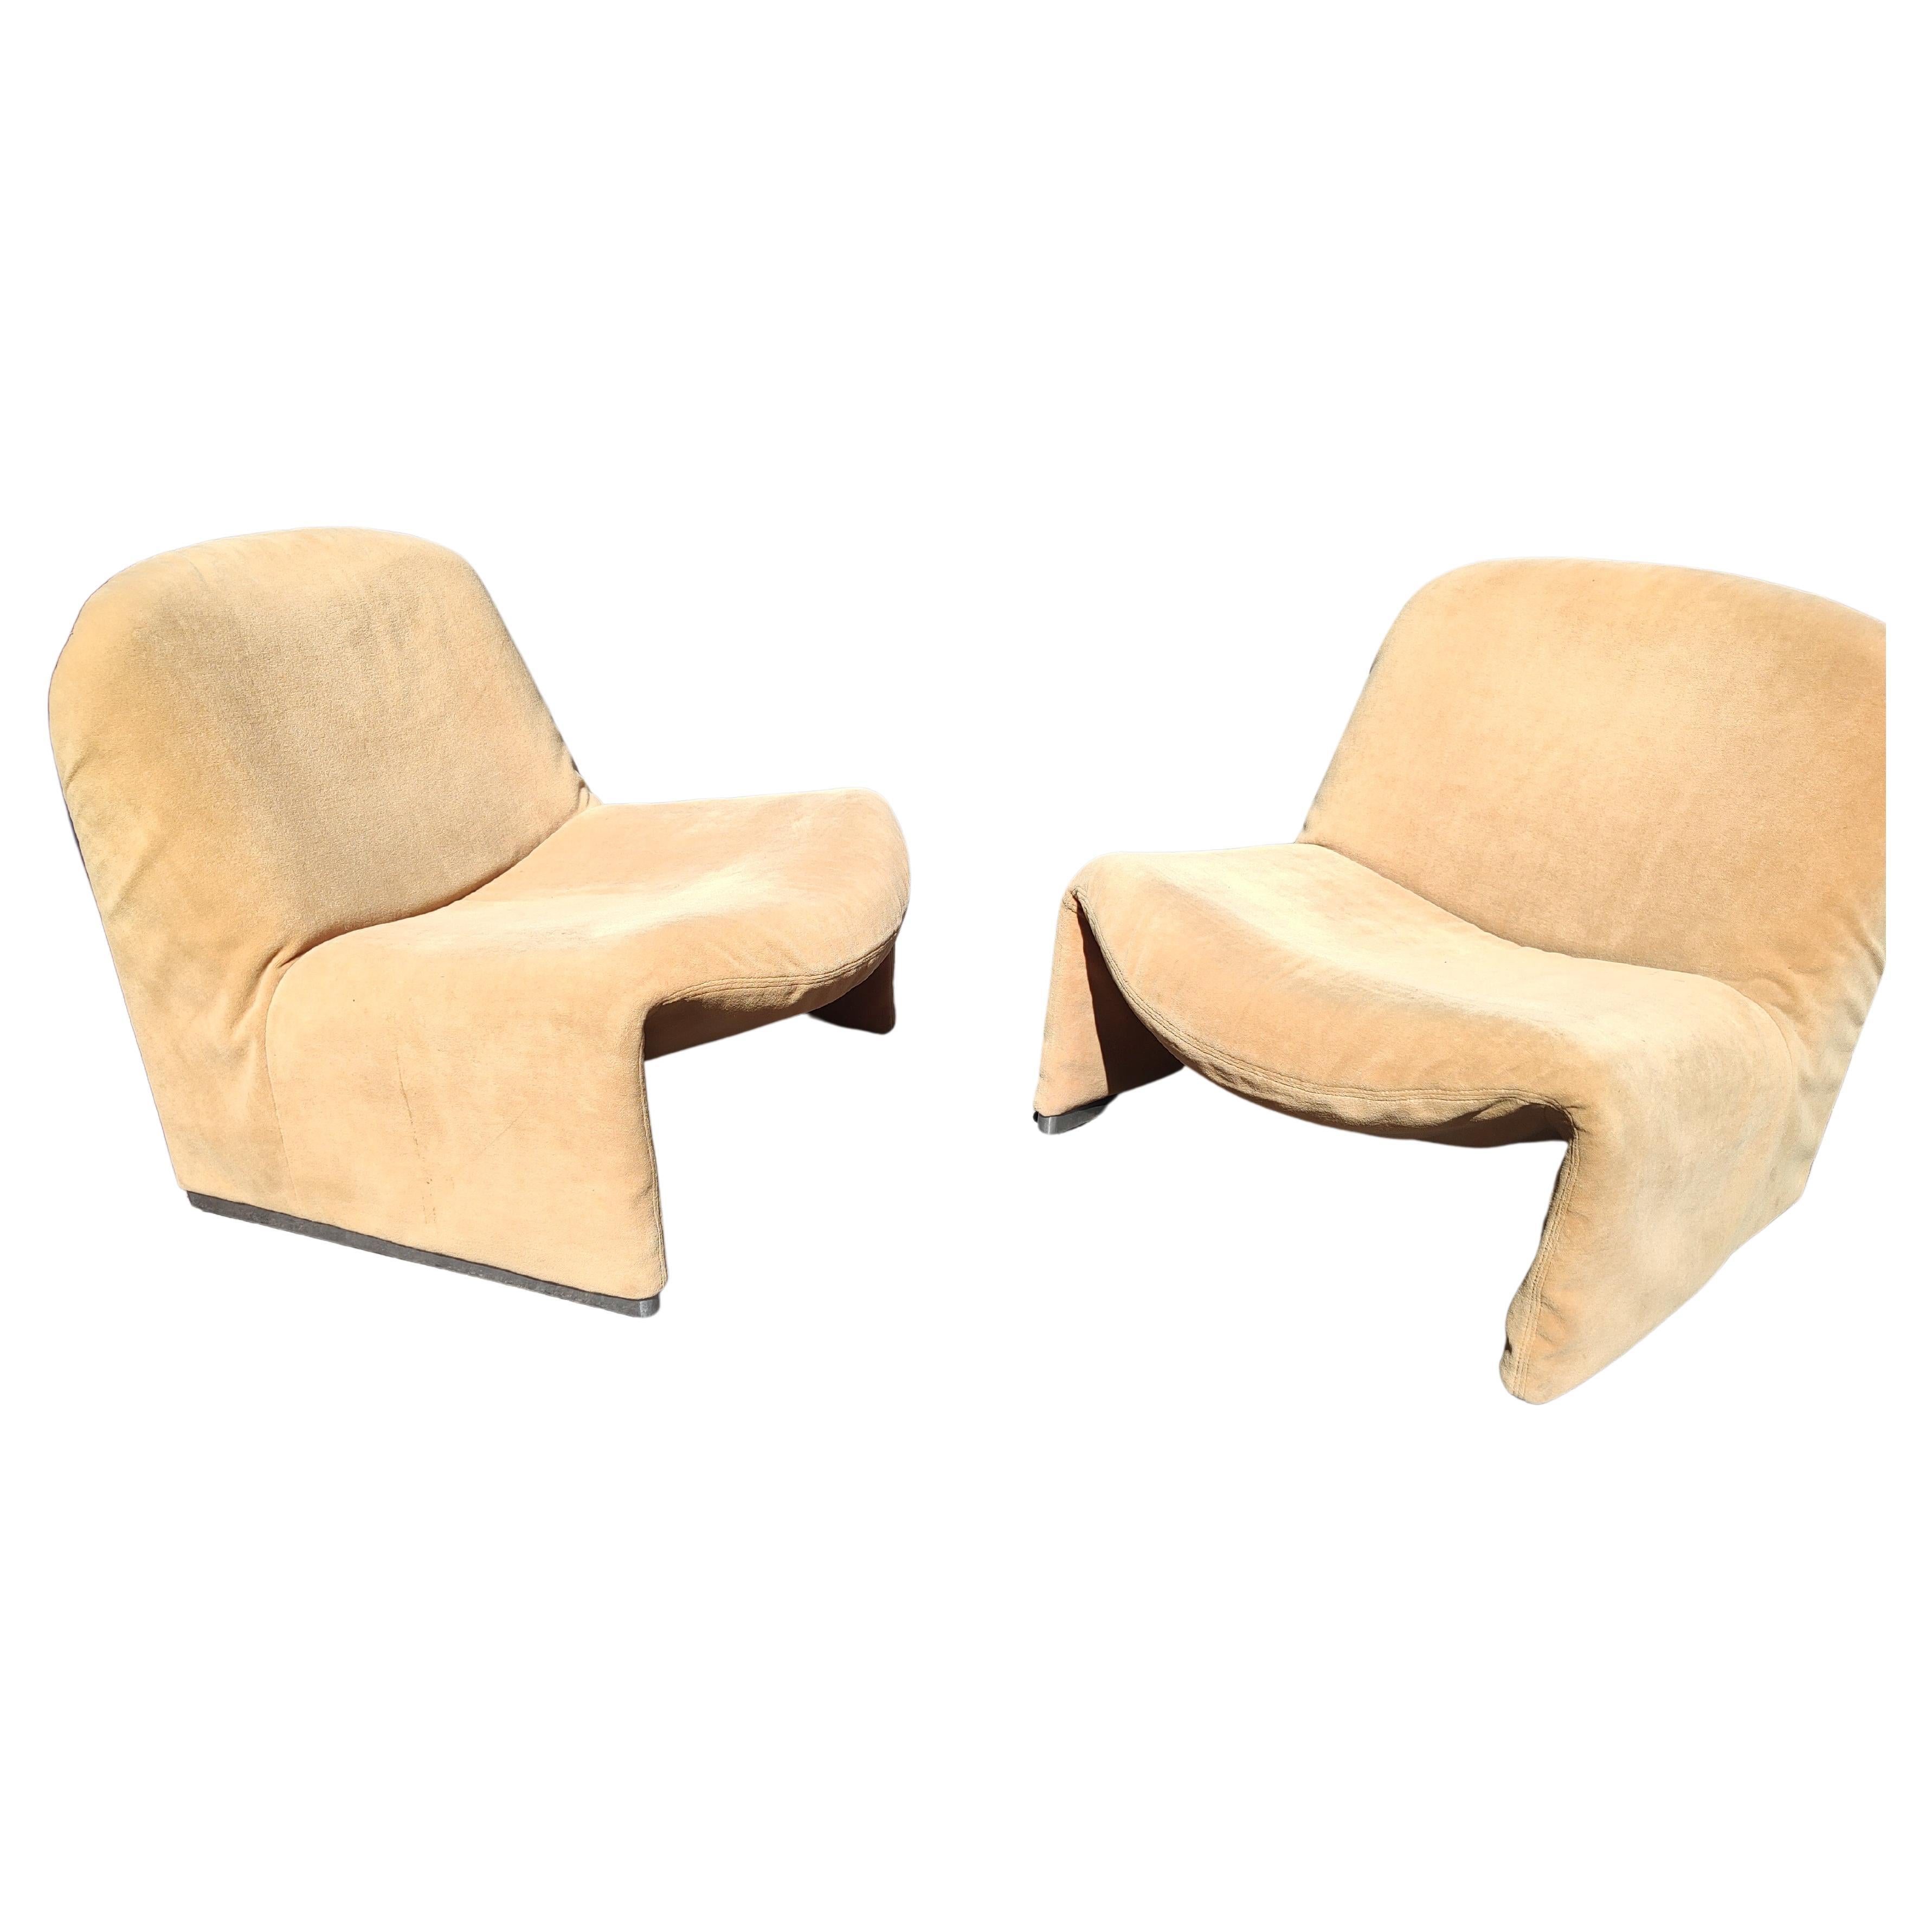 Pair of Mid Century Modern Alky Lounge Chairs Giancarlo Piretti for Artifort  For Sale 4